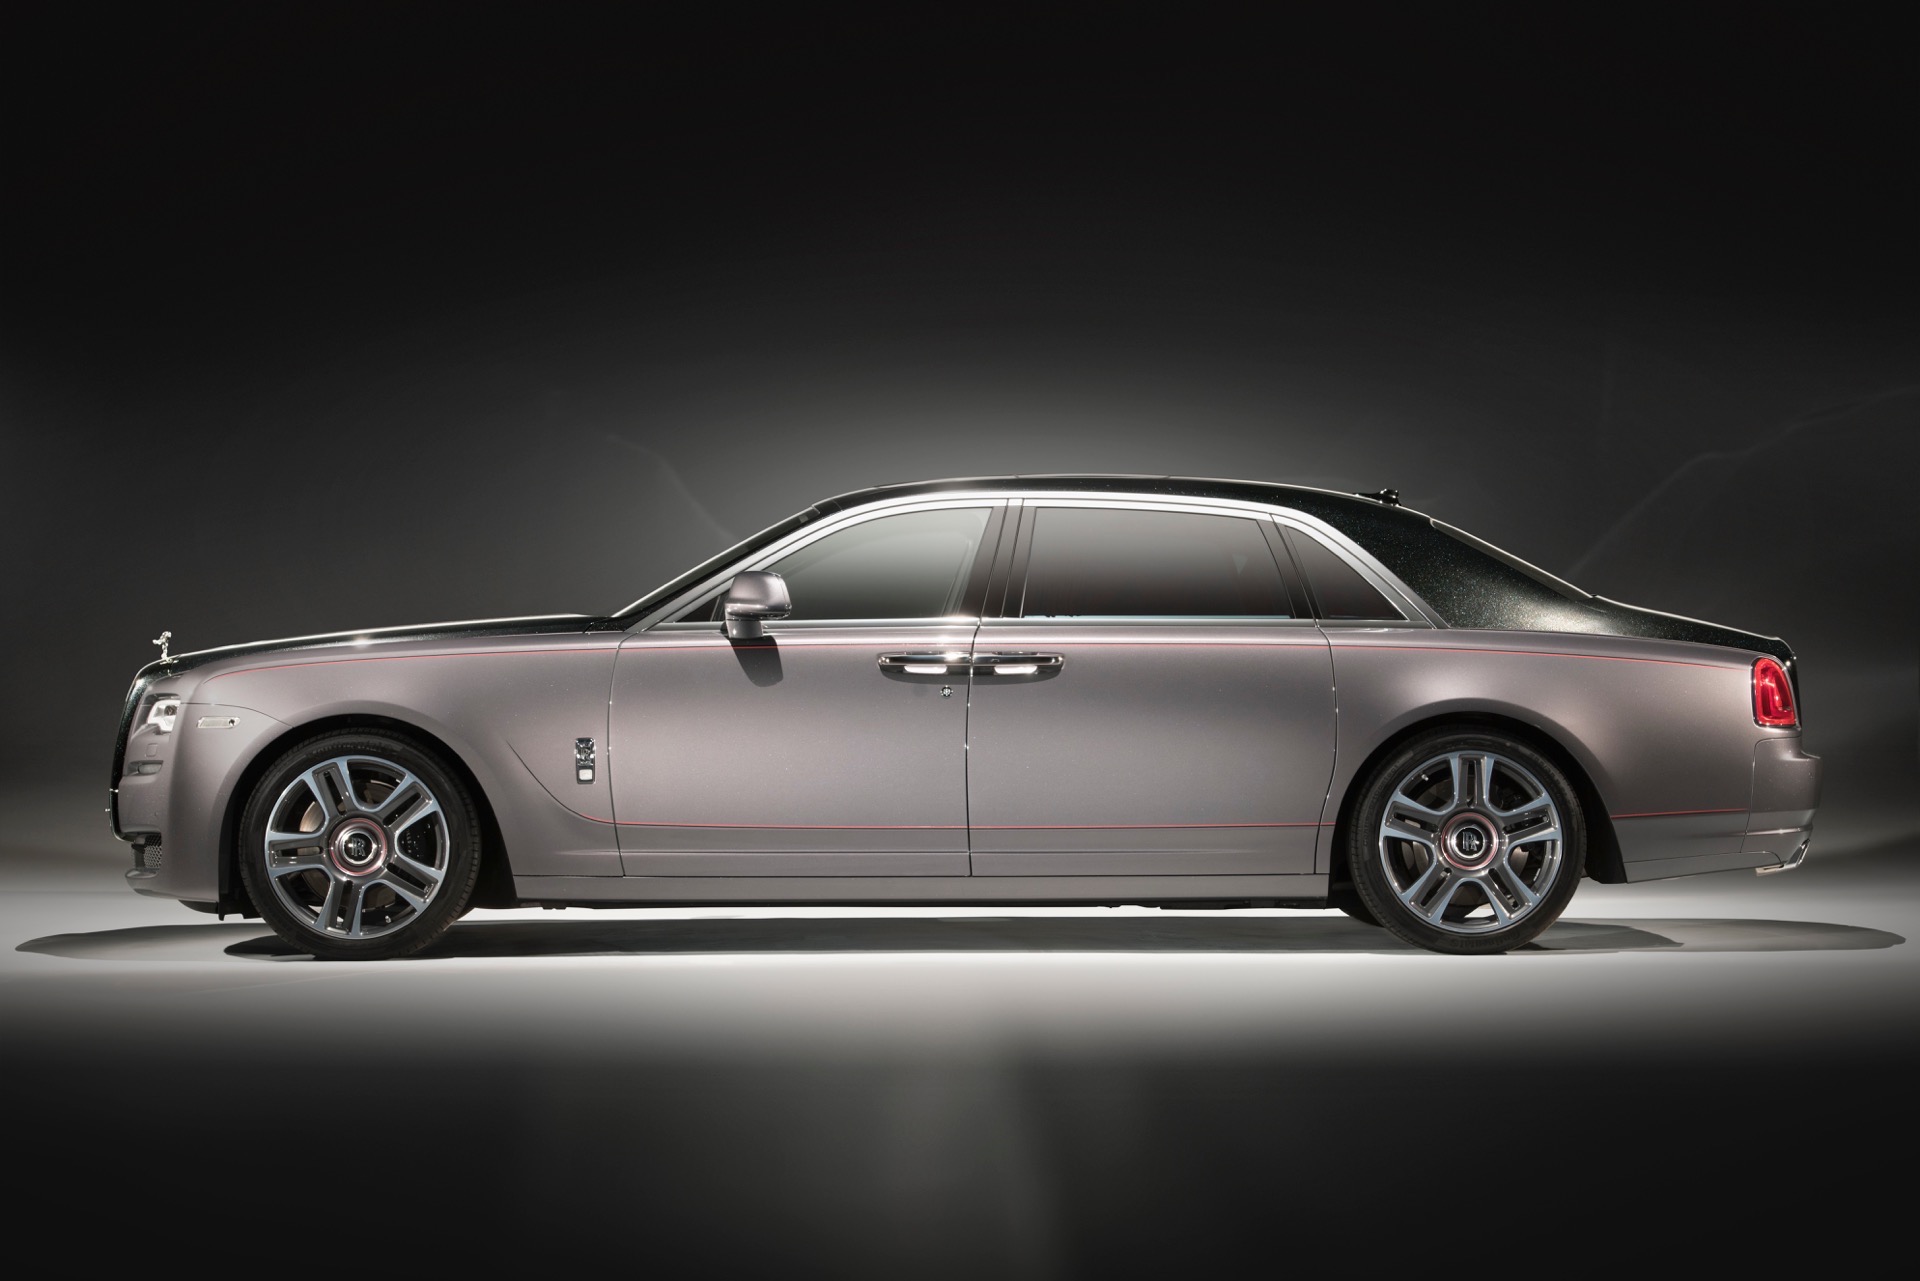 2020 Rolls Royce Ghost be lighter and possibly all-wheel drive